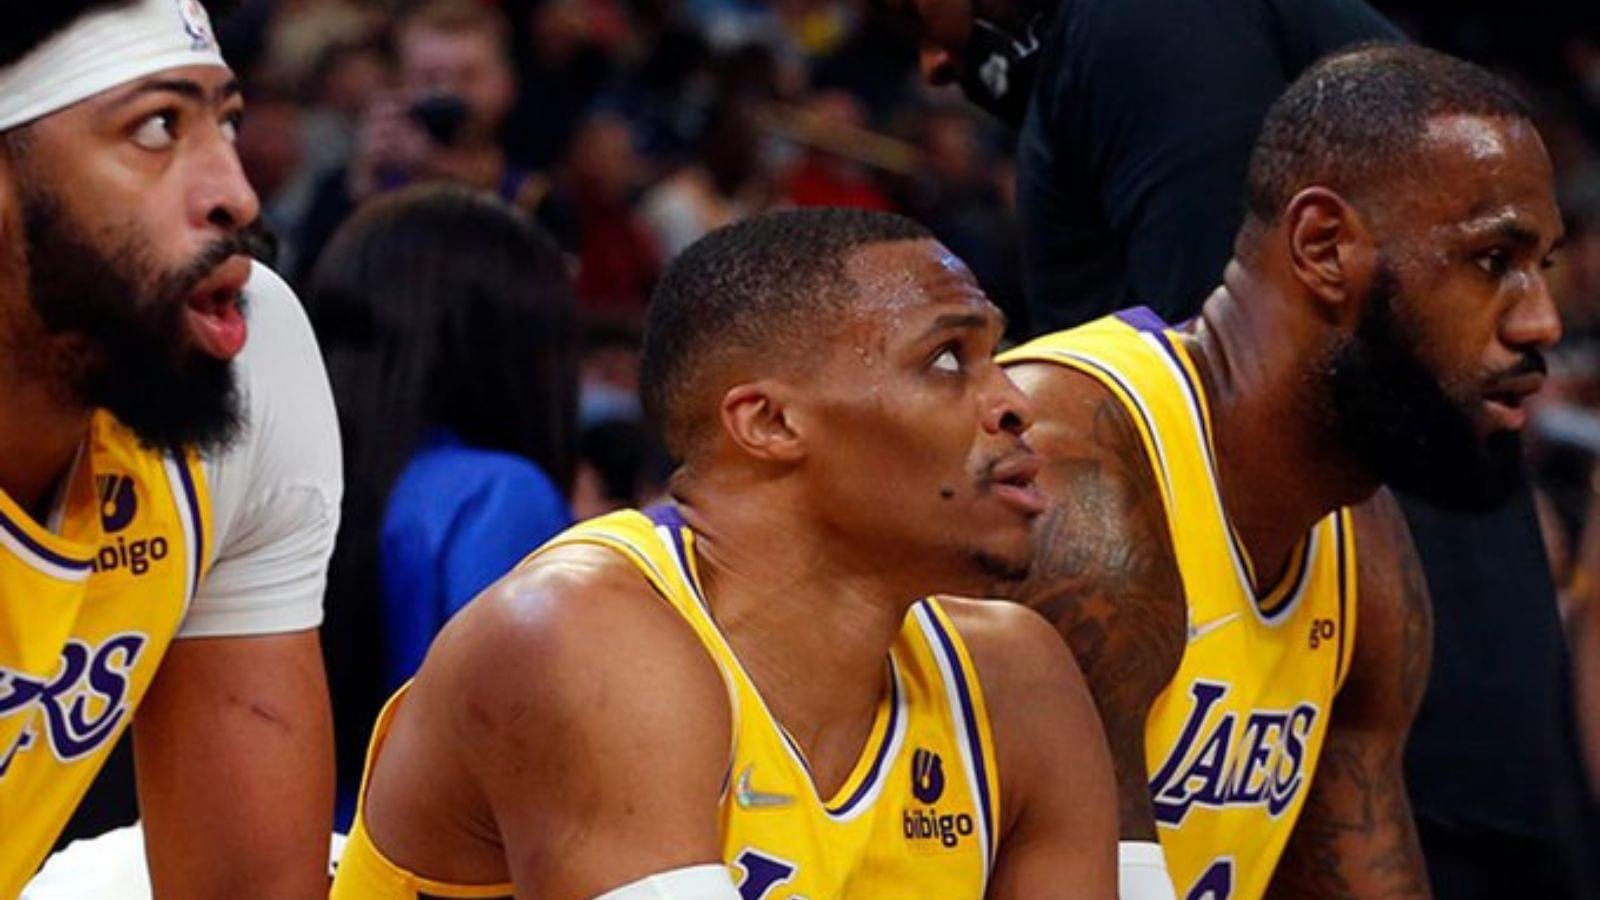 “Russell Westbrook set 8 screens for LeBron James in 2nd game, didn’t set 2 until March”: Lakers point guard wasted everyone's season by not doing anything according to plan